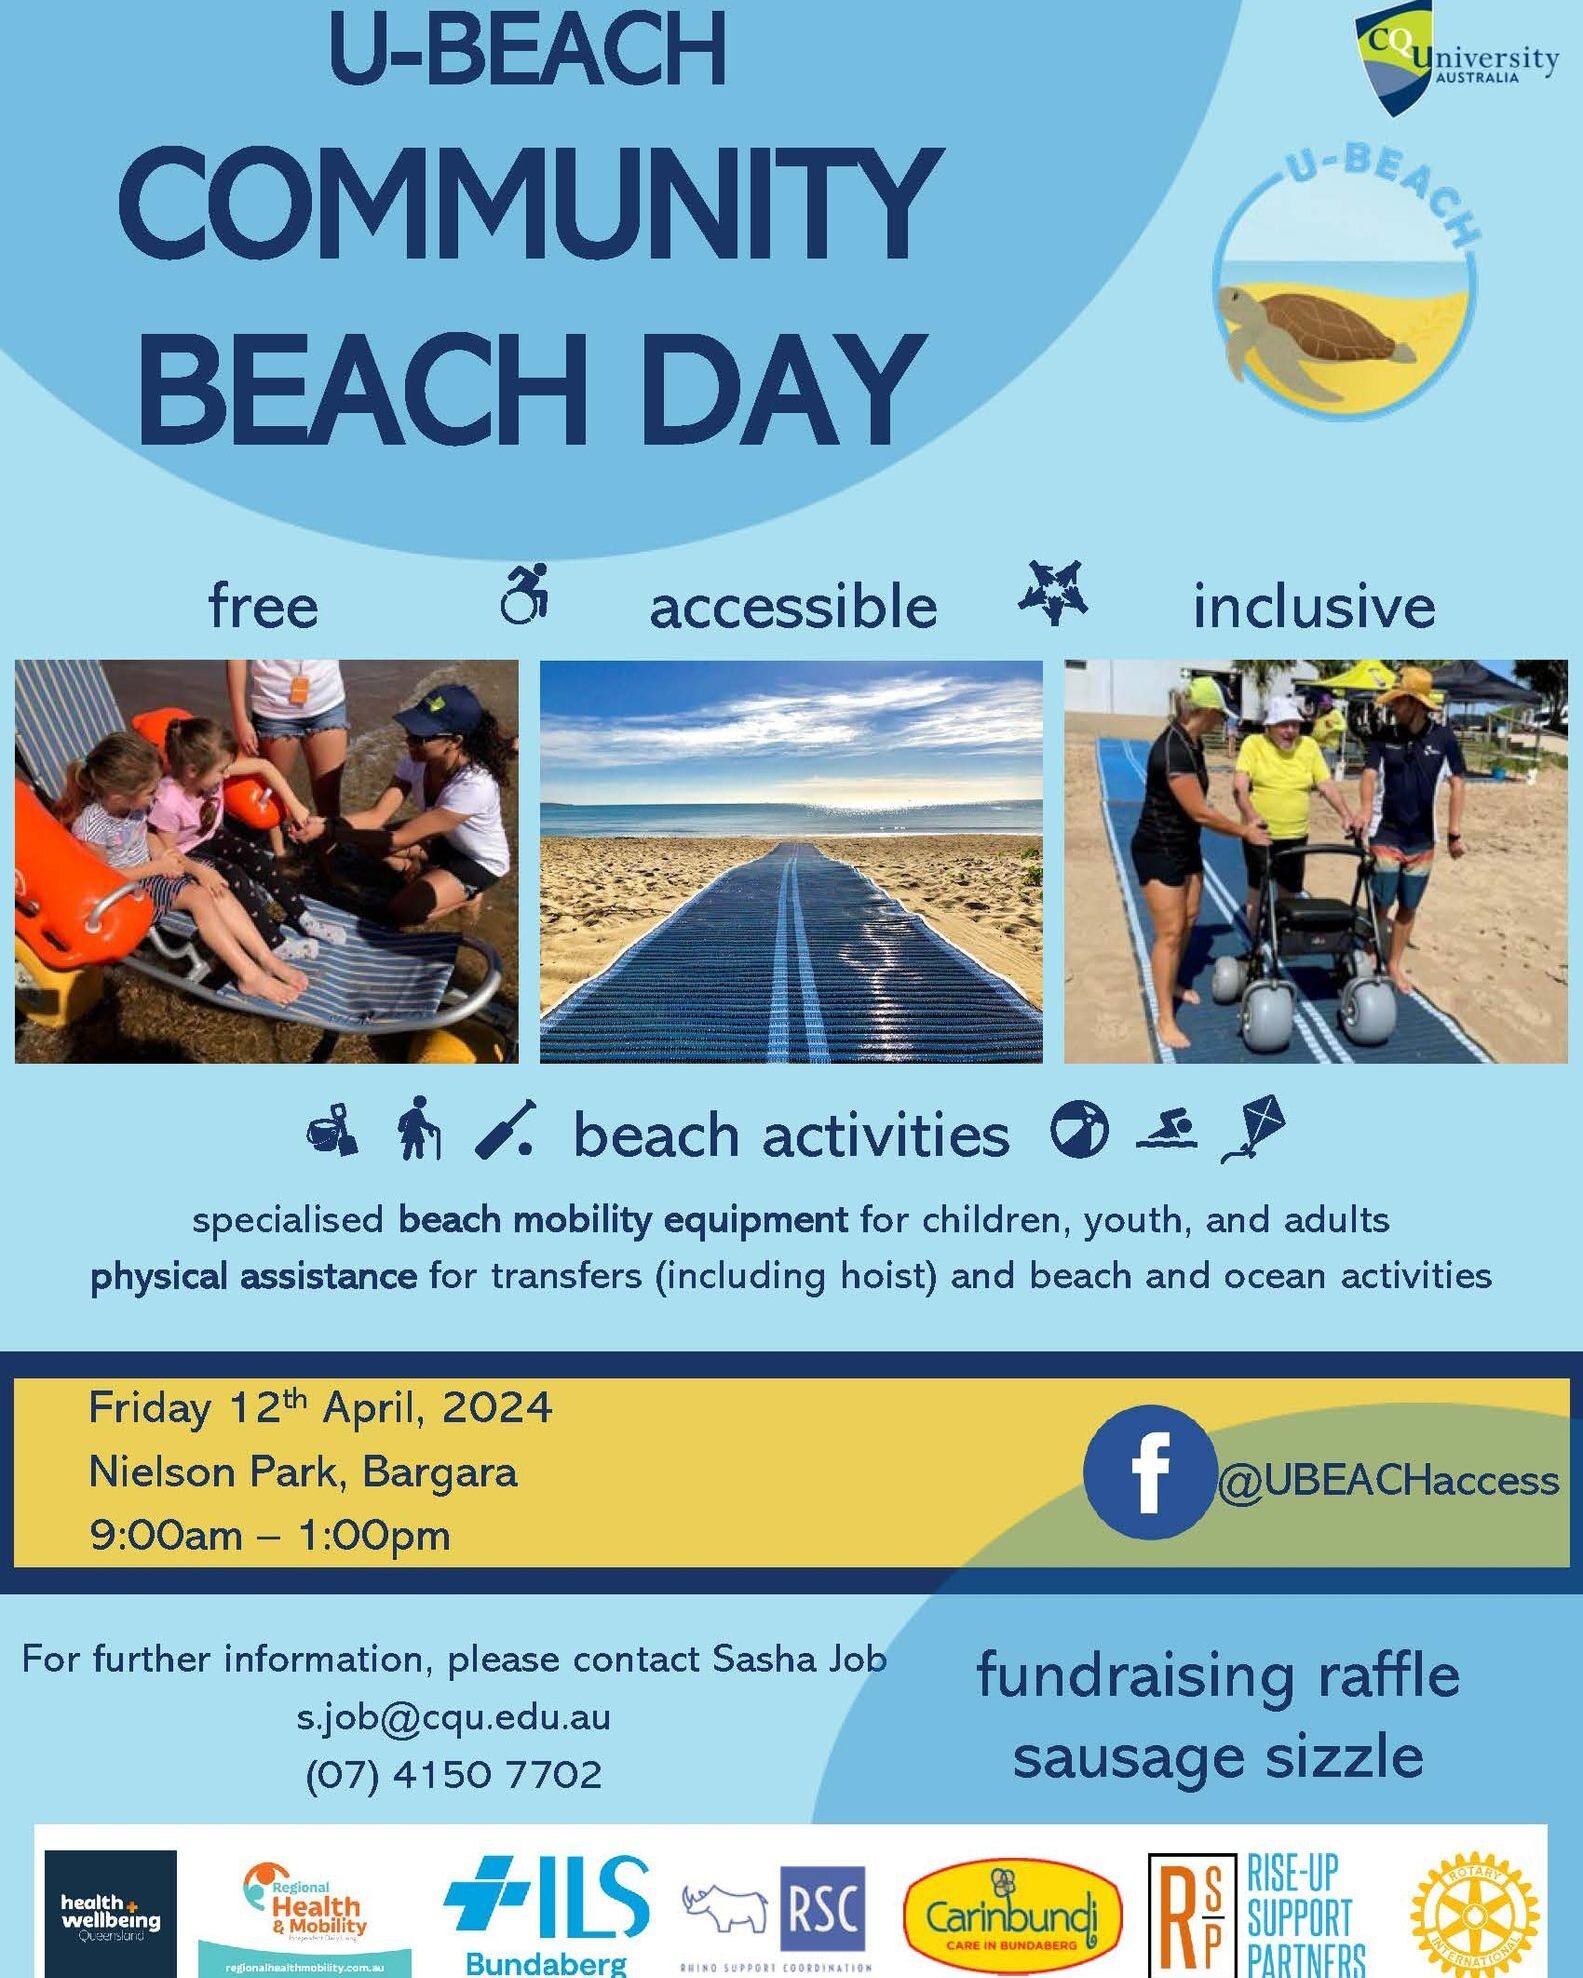 Come along to the U-BEACH community day on Friday 12th April! 🏖️☀️

It will be a fun and inclusive day with many options of accessible beach equipment and plenty of volunteers - these beach days are not to be missed!

#accessiblebeaches #makebeaches